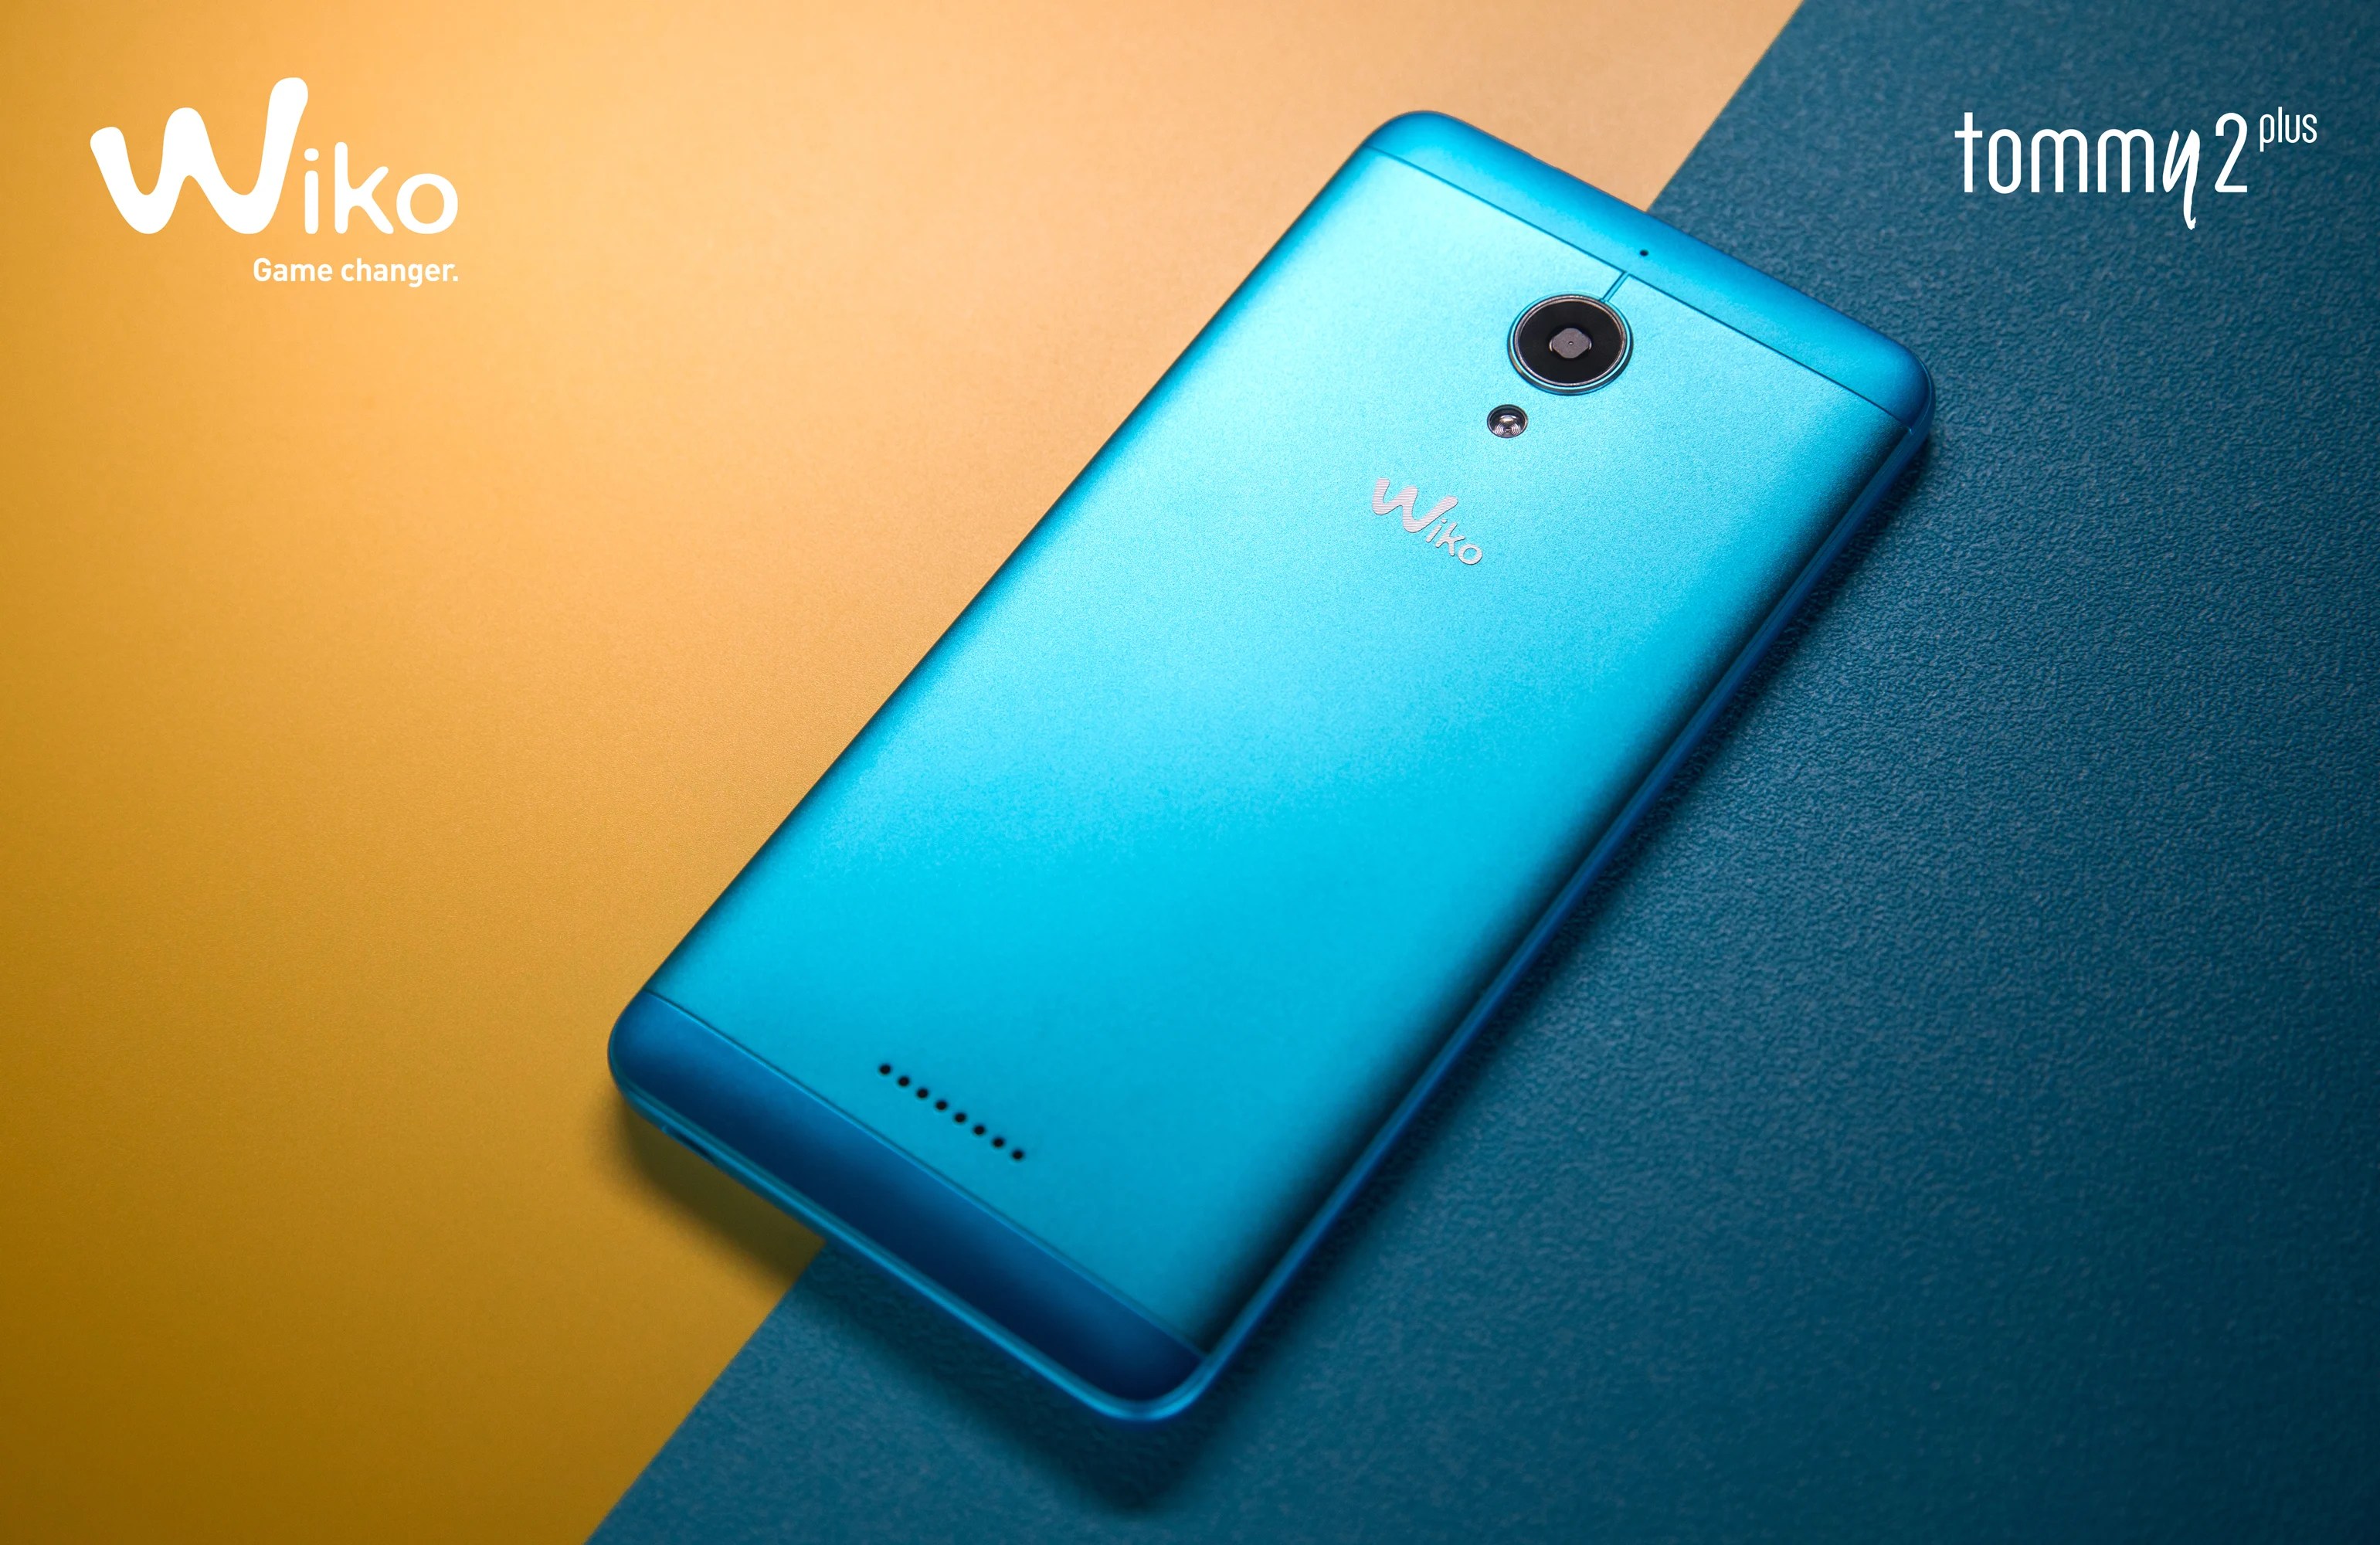 wiko-tommy2plus-design